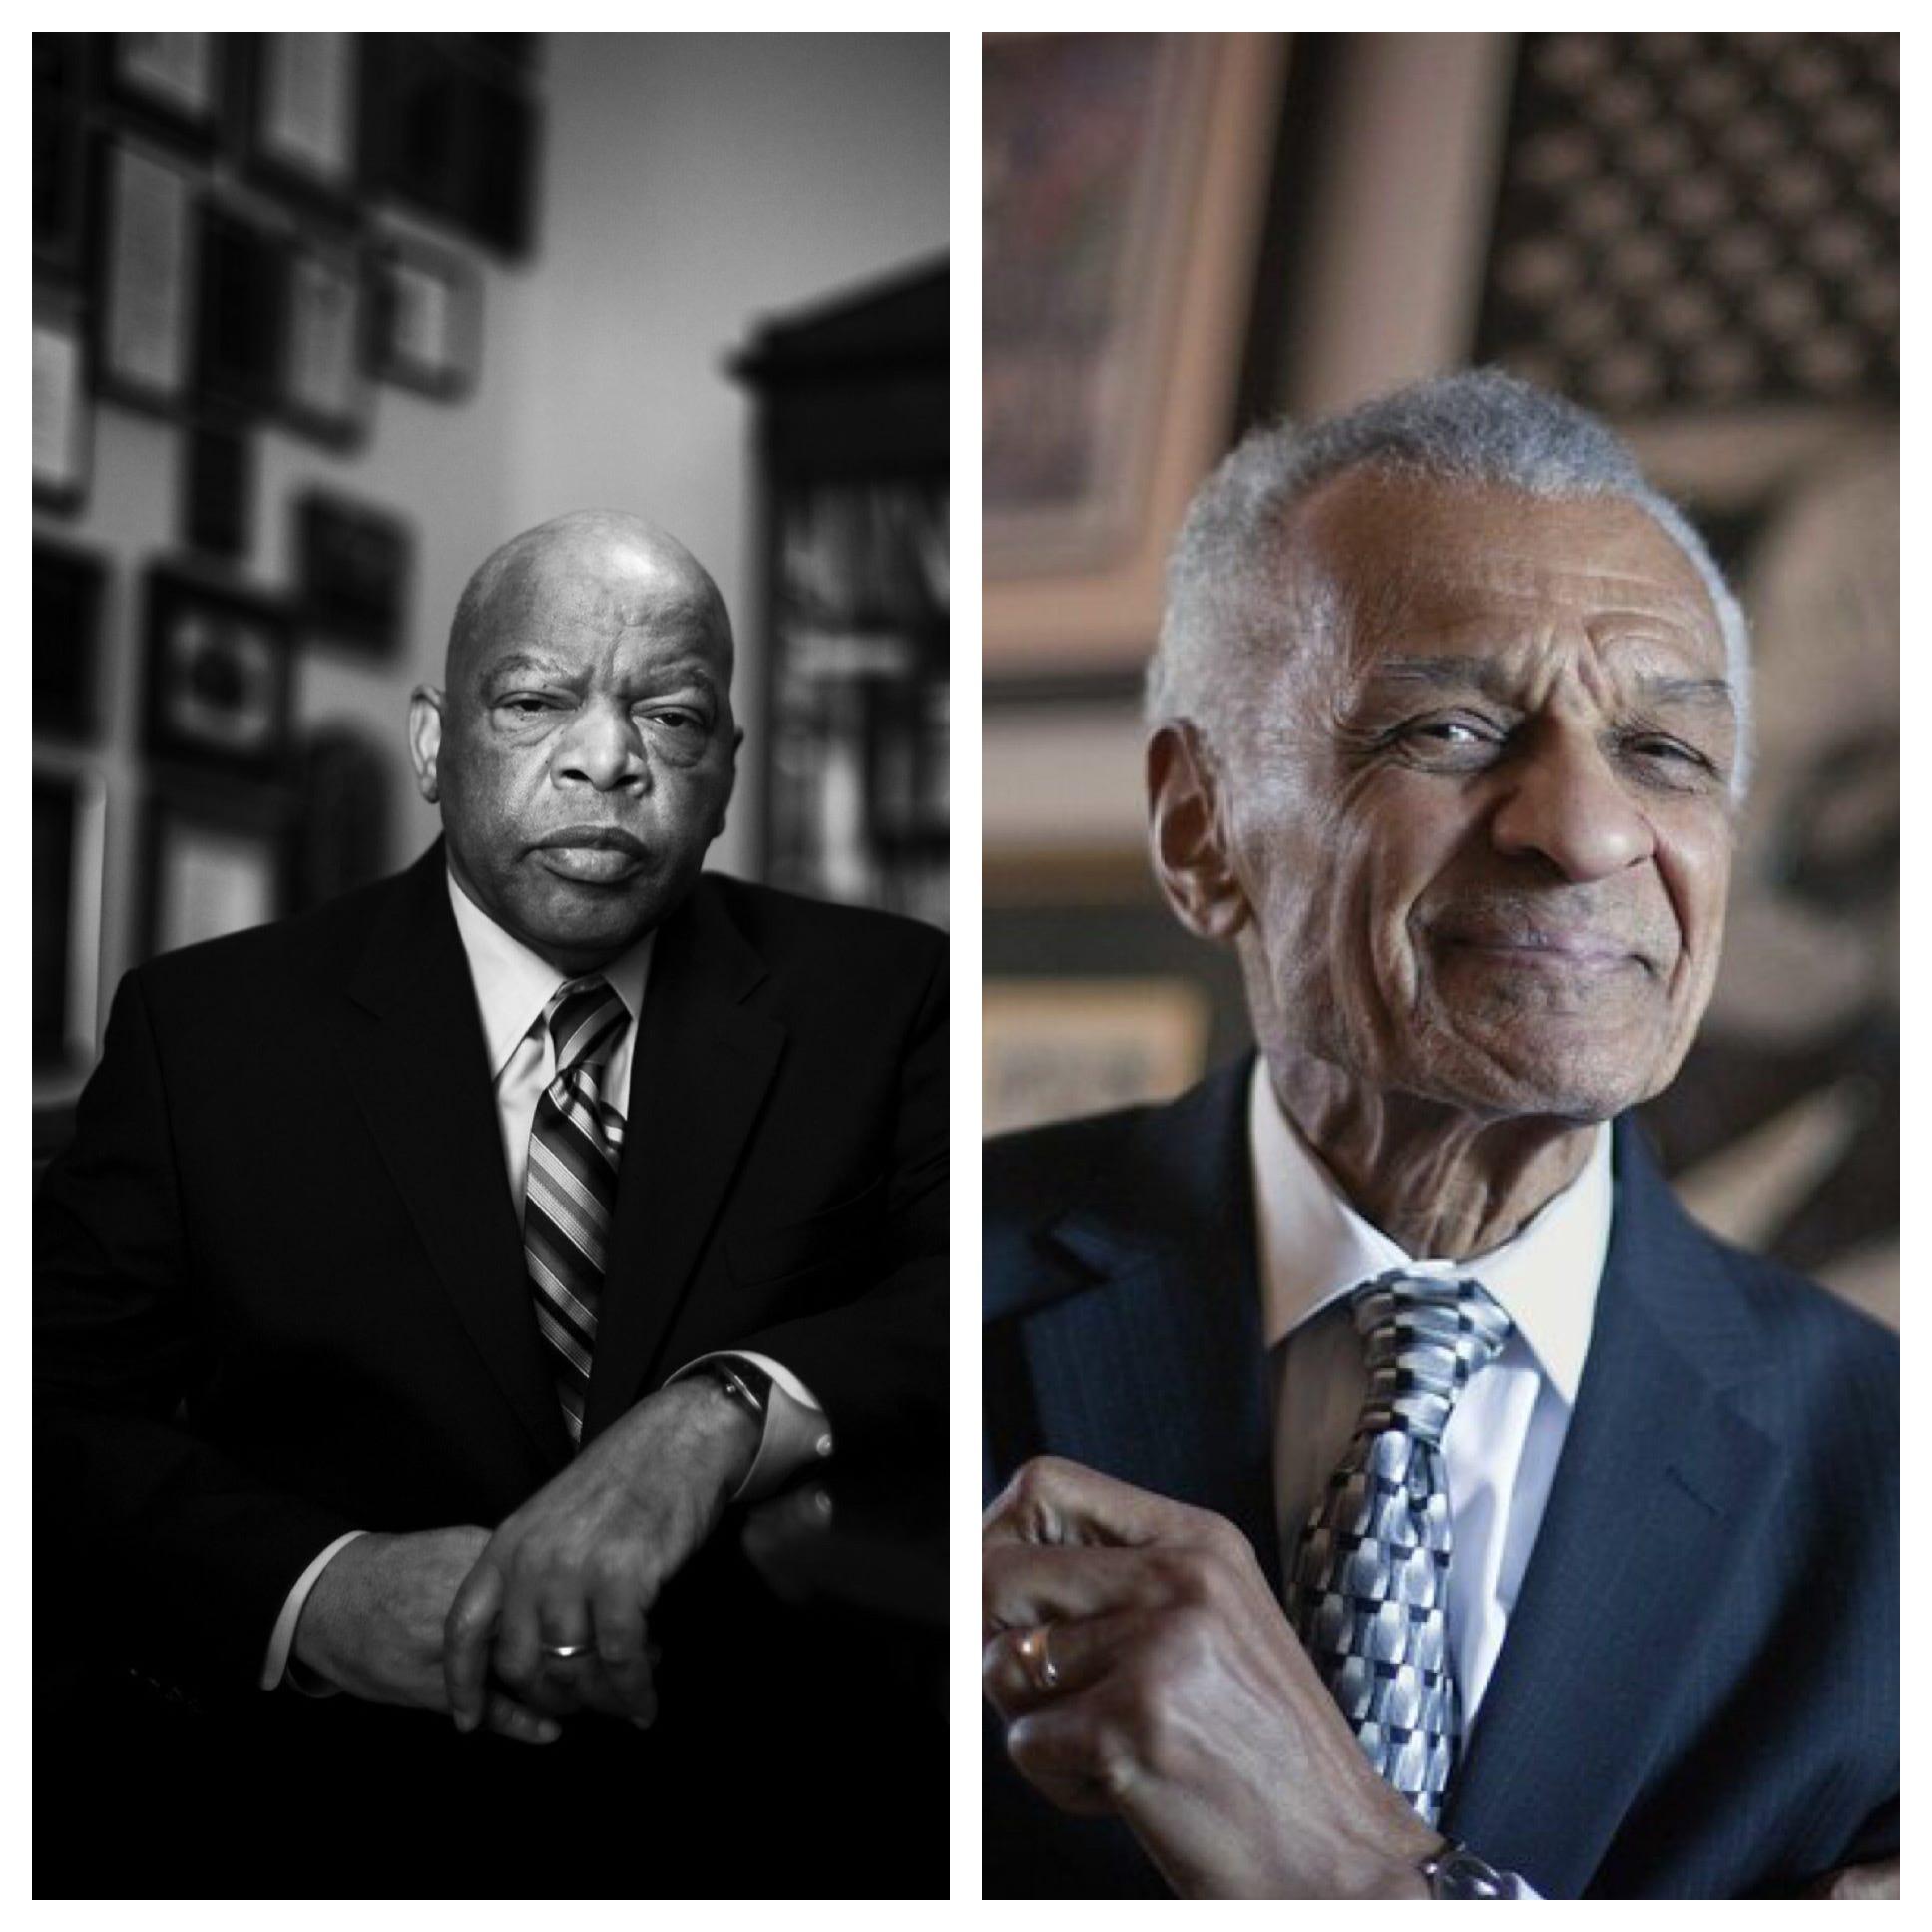 A backstory on moments in the lives of John Lewis and C.T. Vivian